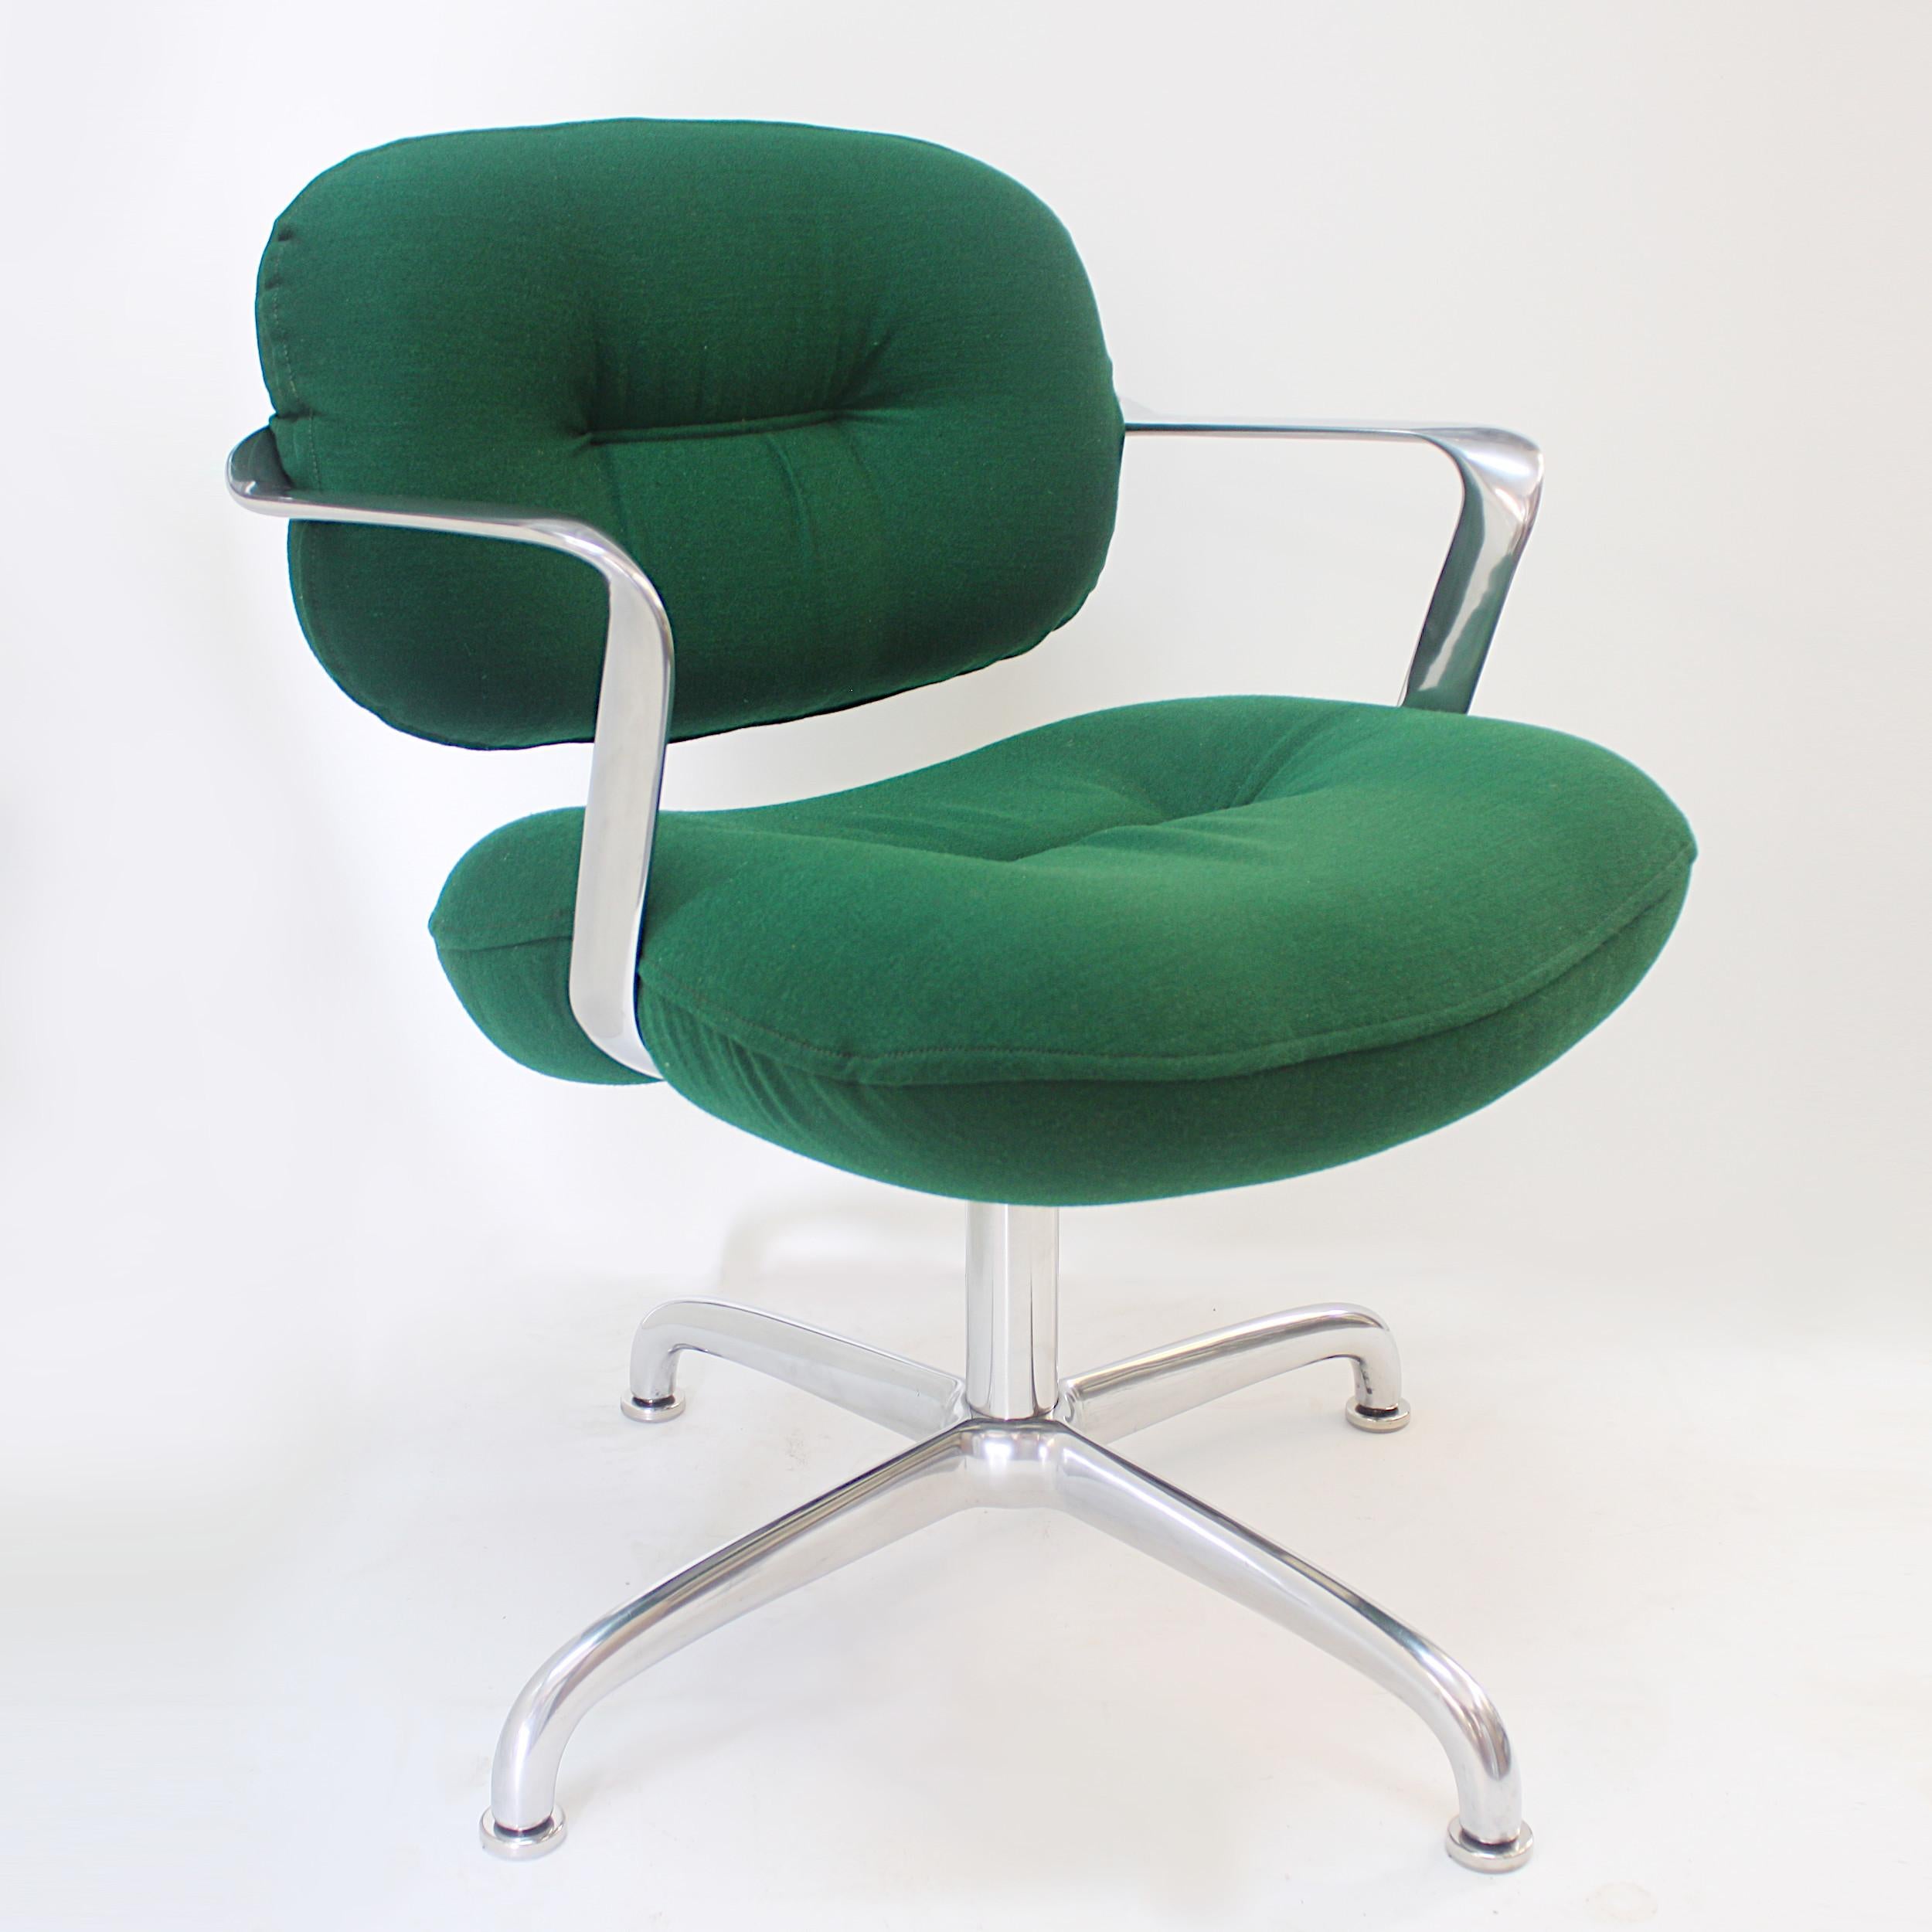 Arguably one of the most elegant desk chair designs from the midcentury era, this Morrison/Hannah design for Knoll Studios is utilitarian sculpture at its best. Chair features a curvaceous, cast-aluminum frame, Green tufted cushions, and aluminum